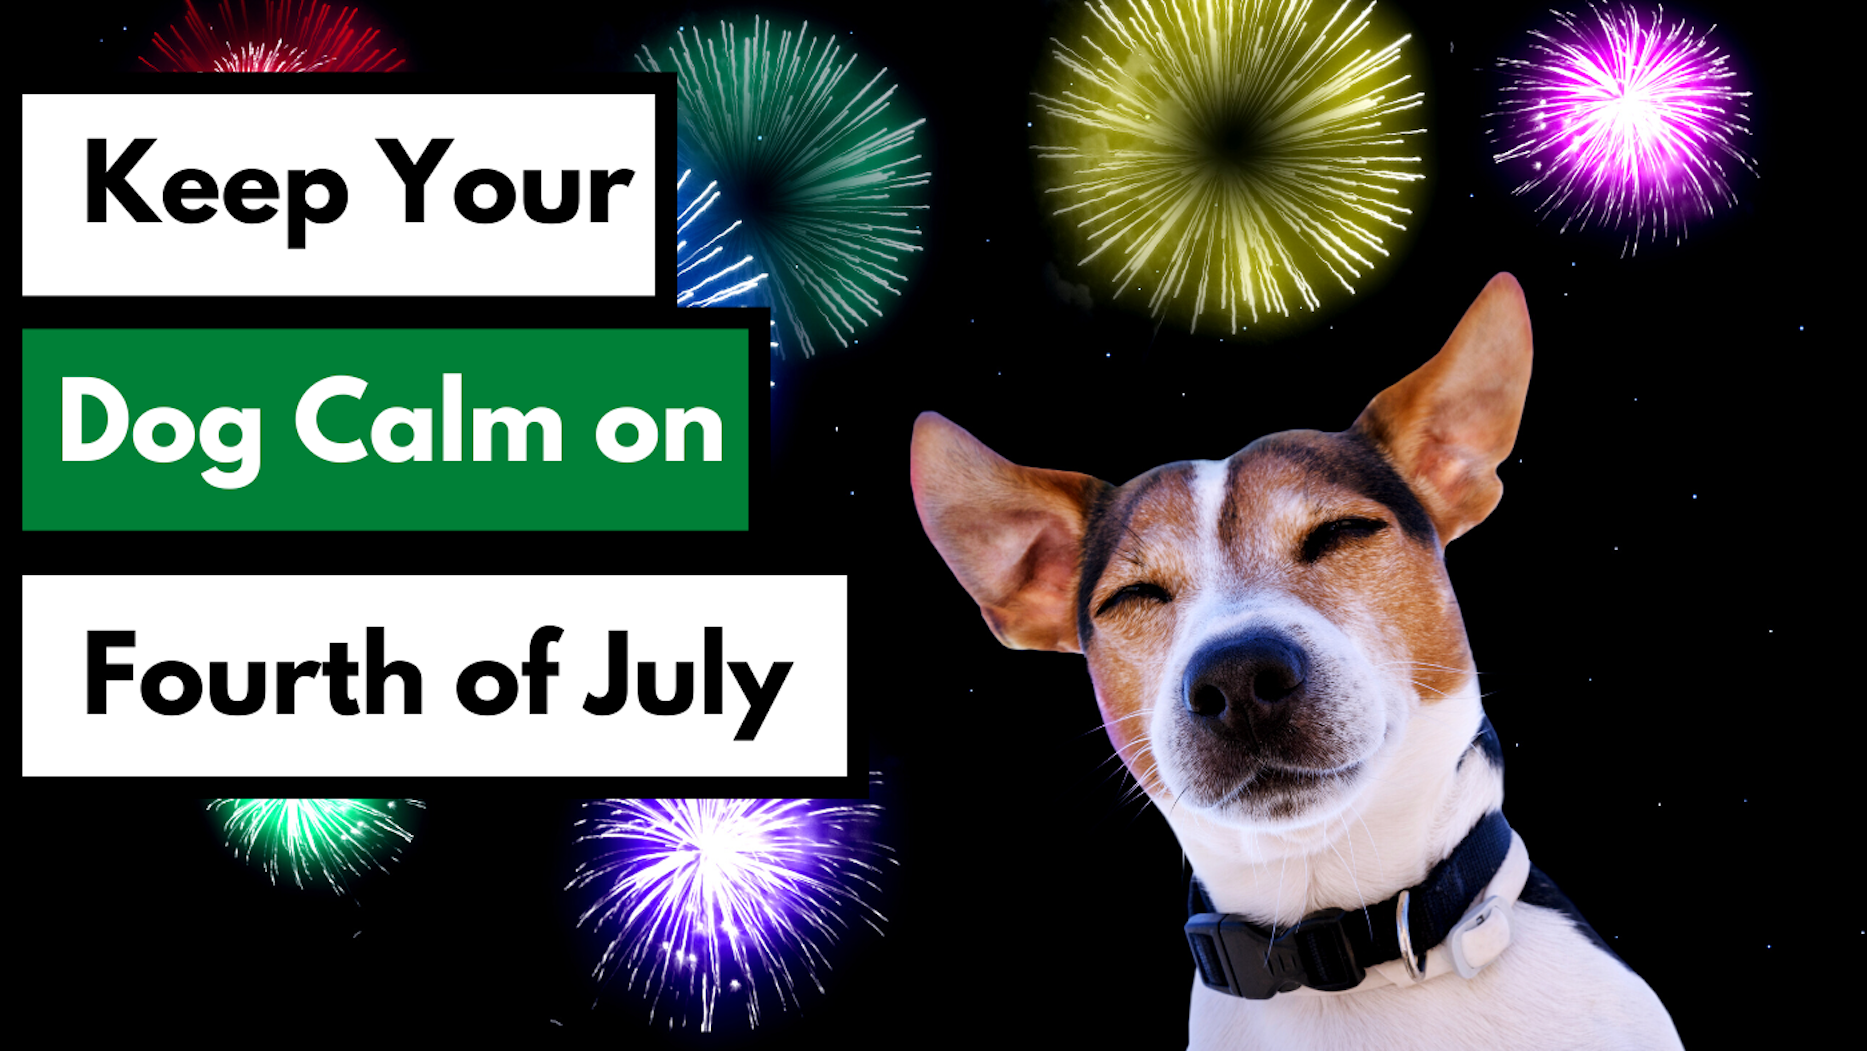 Keep your dog calm on Fourth of July